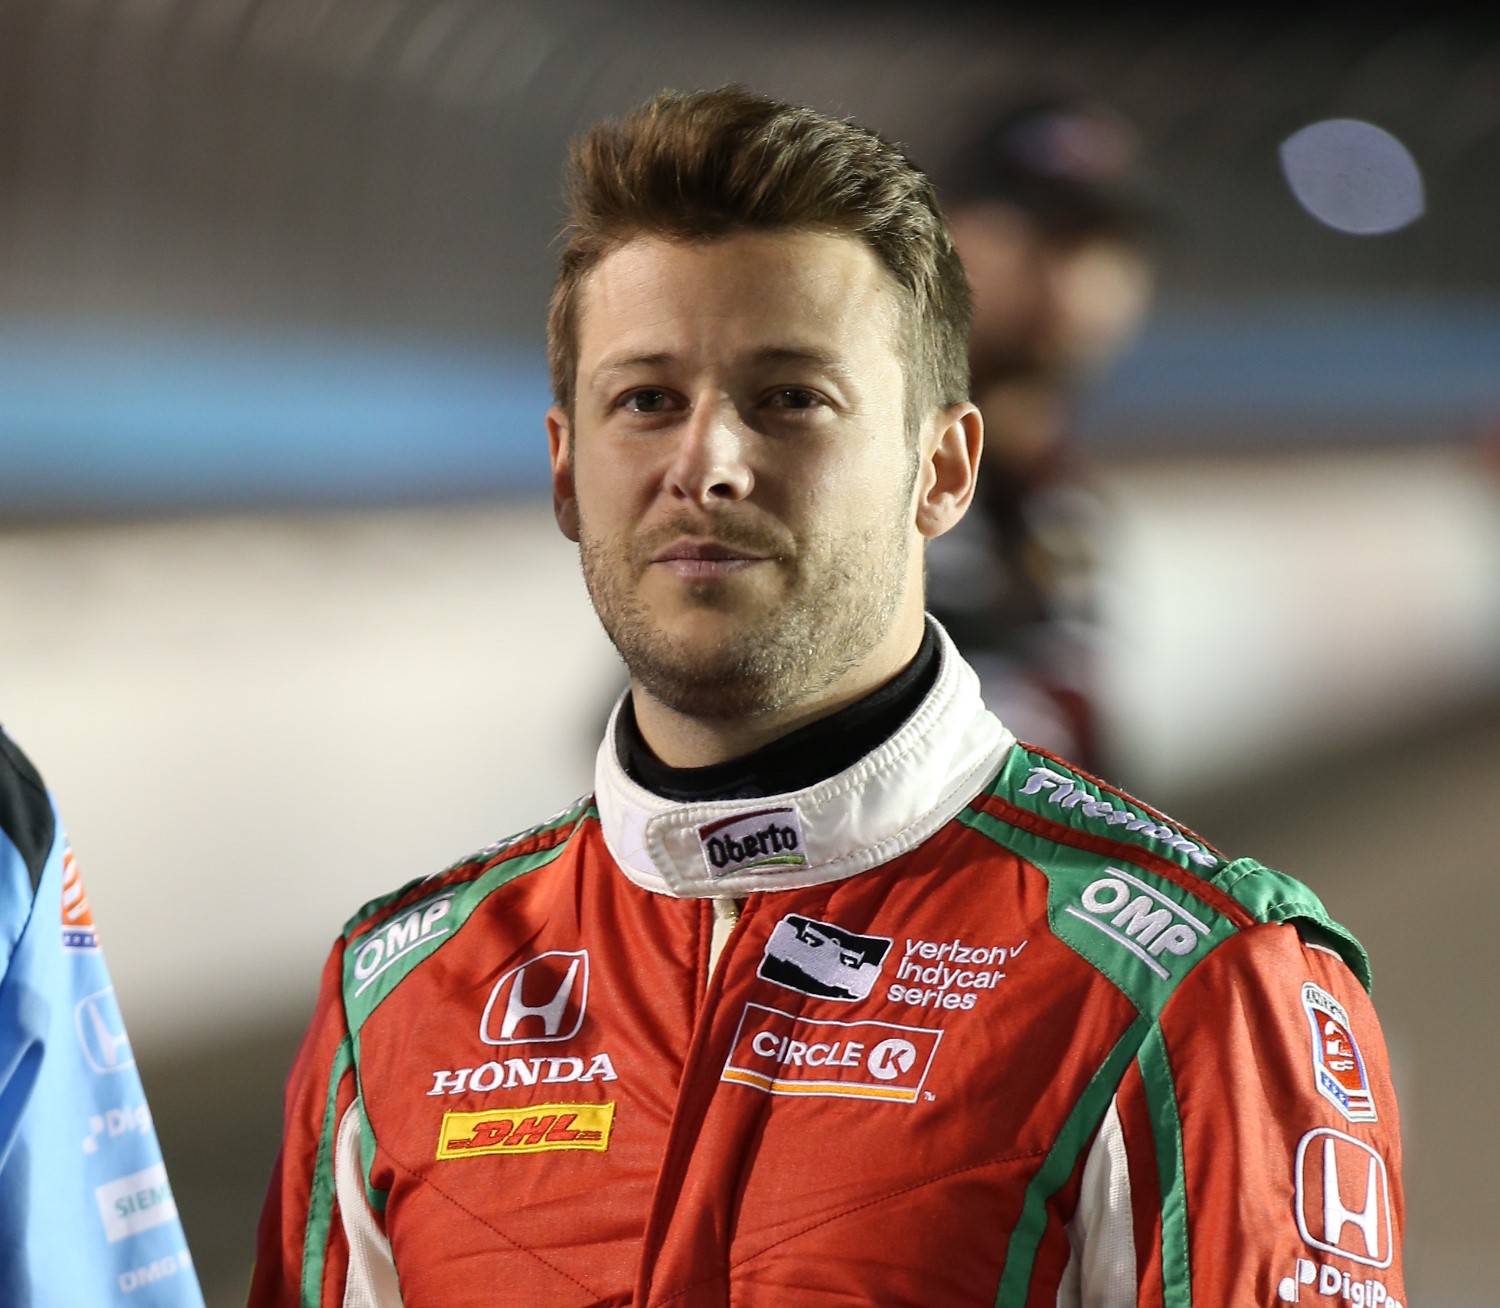 With his IndyCar career floundering, perhaps Marco Andretti will have better luck in NASCAR